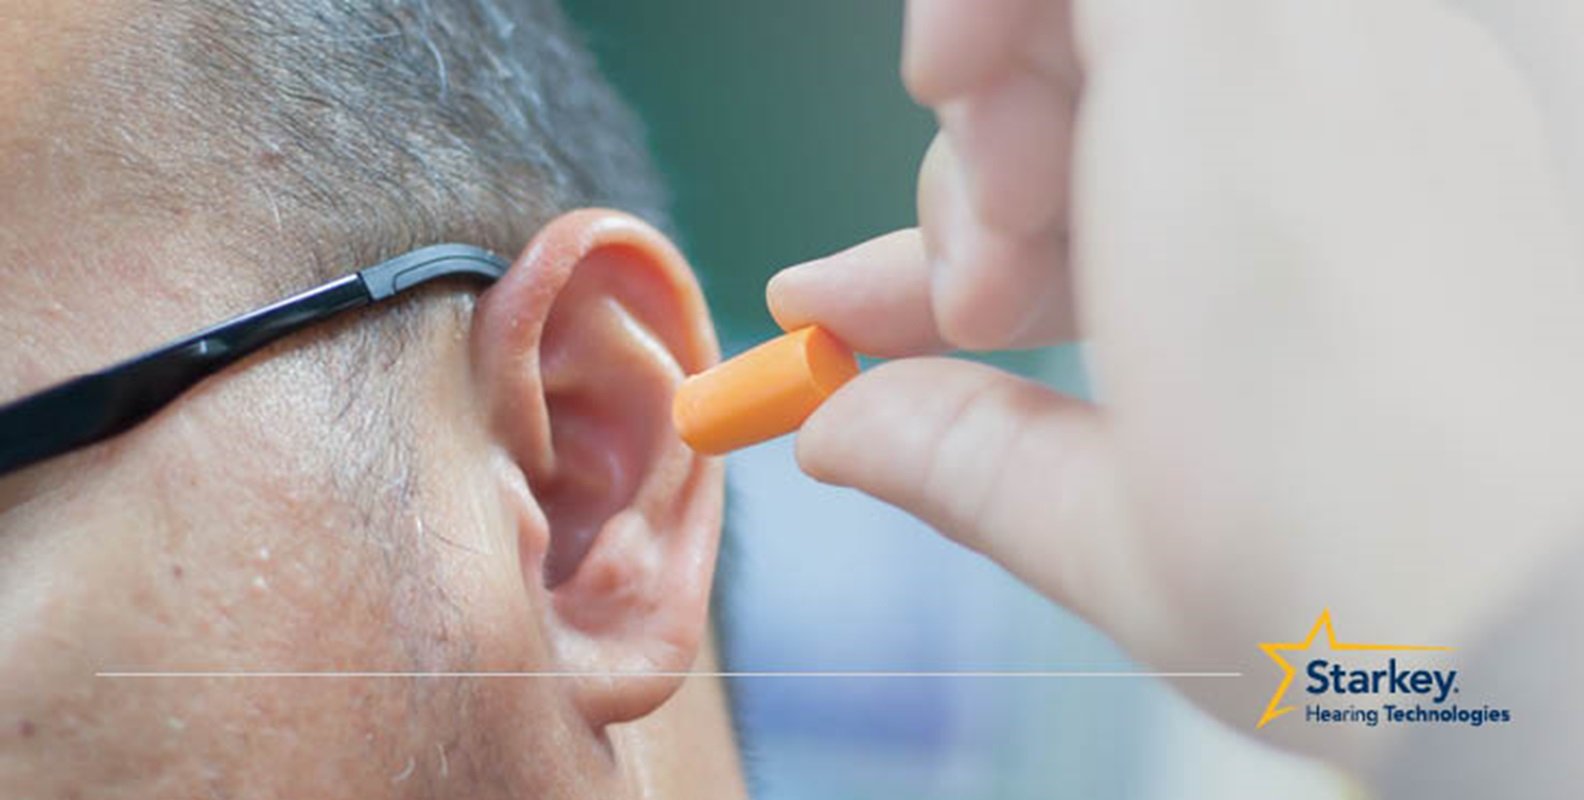 10 tips to prevent noise induced hearing loss.